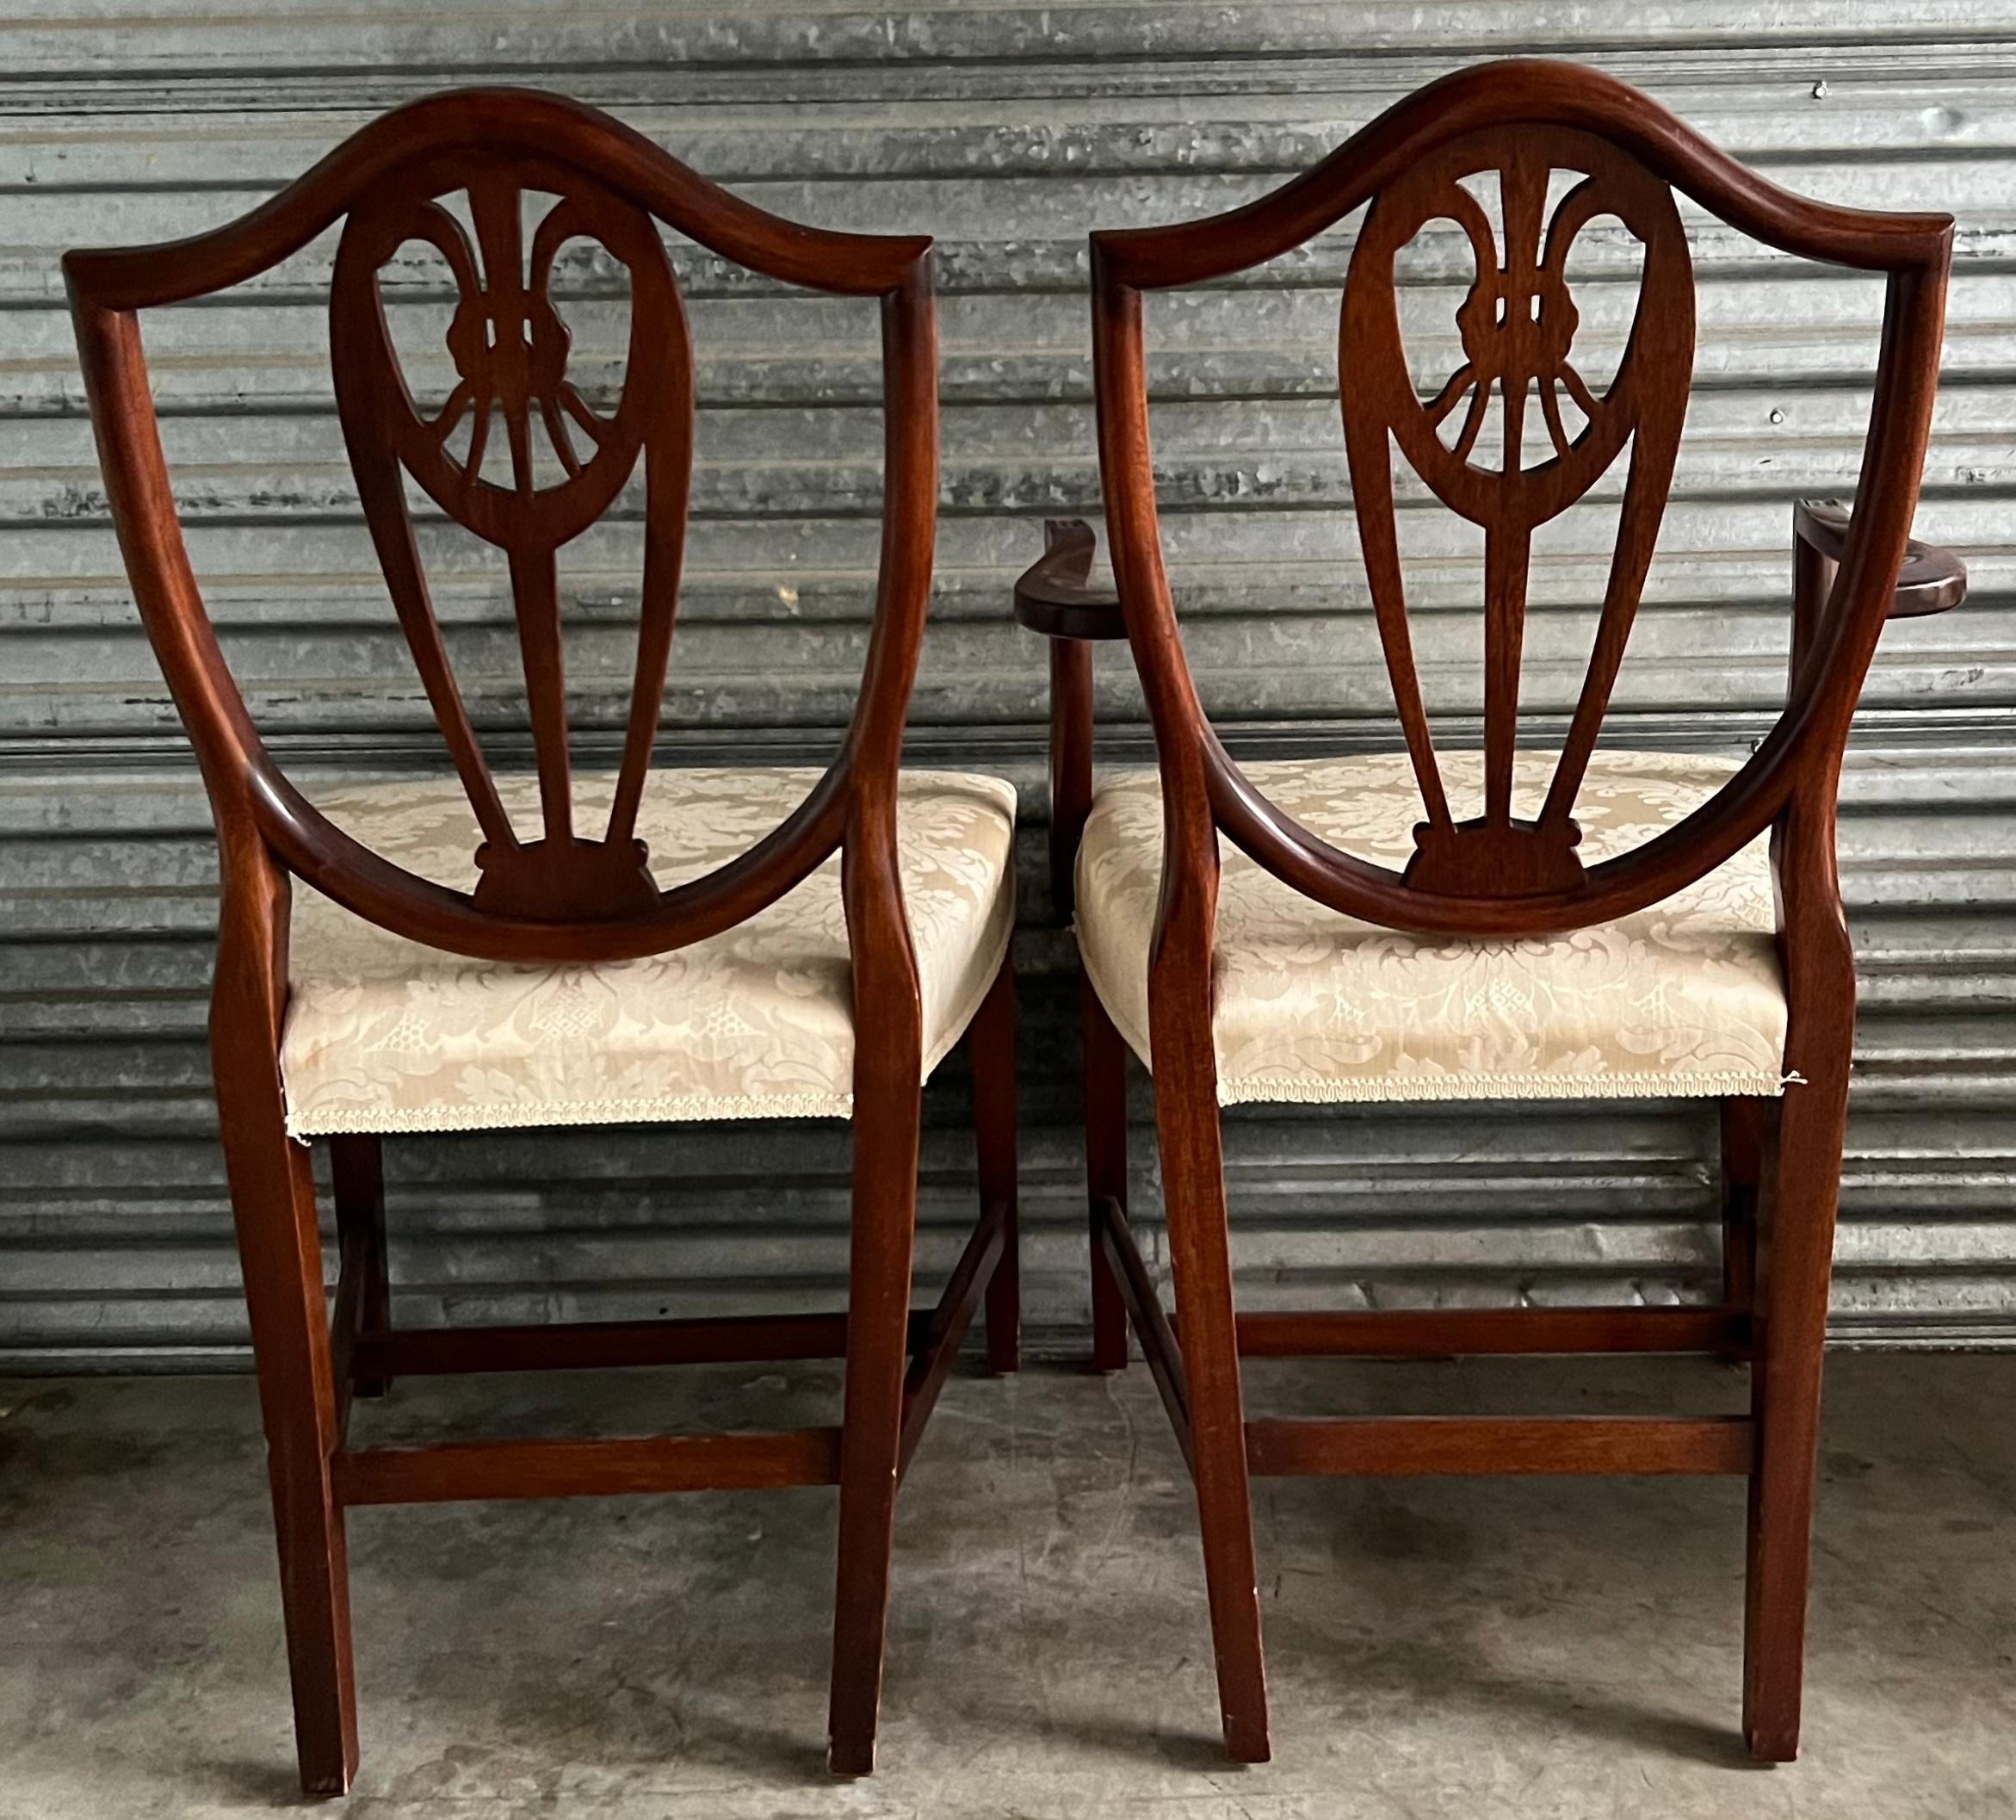 English Mahogany Hepplewhite Style Dining Chairs by Bevan Funnell Ltd., S/6 1